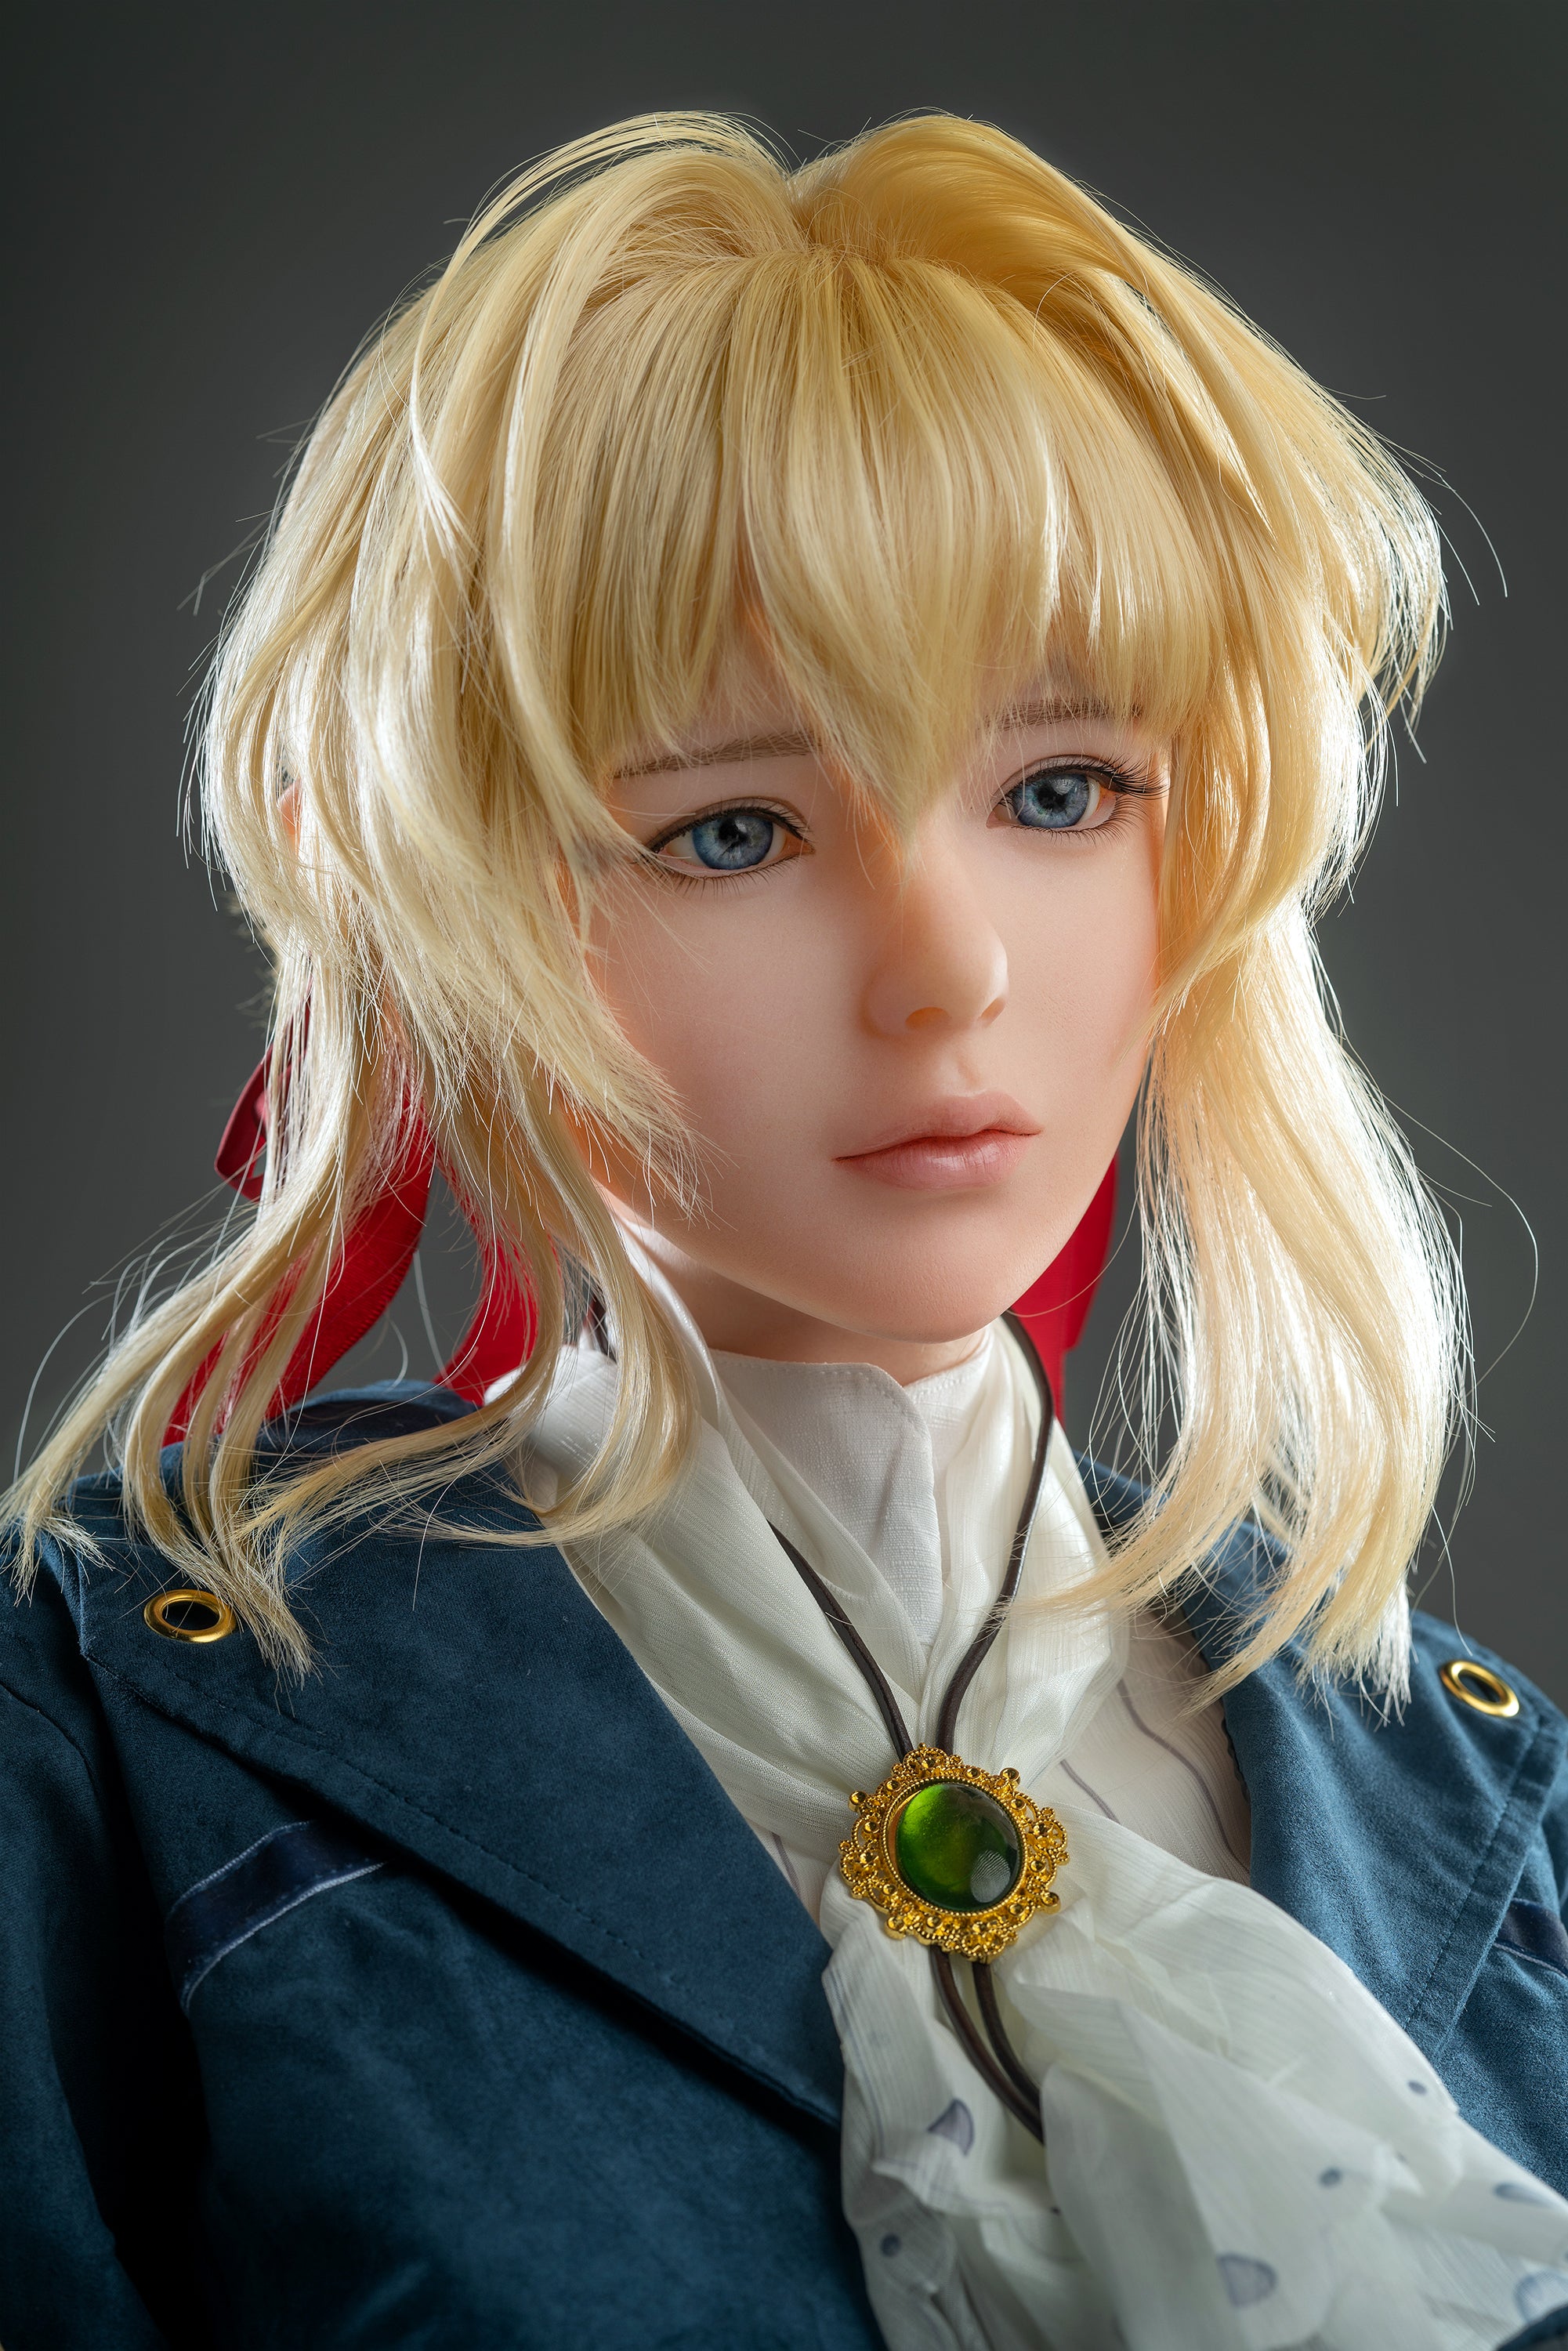 Game Lady 156 cm Silicone - Violet Evergarden | Buy Sex Dolls at DOLLS ACTUALLY